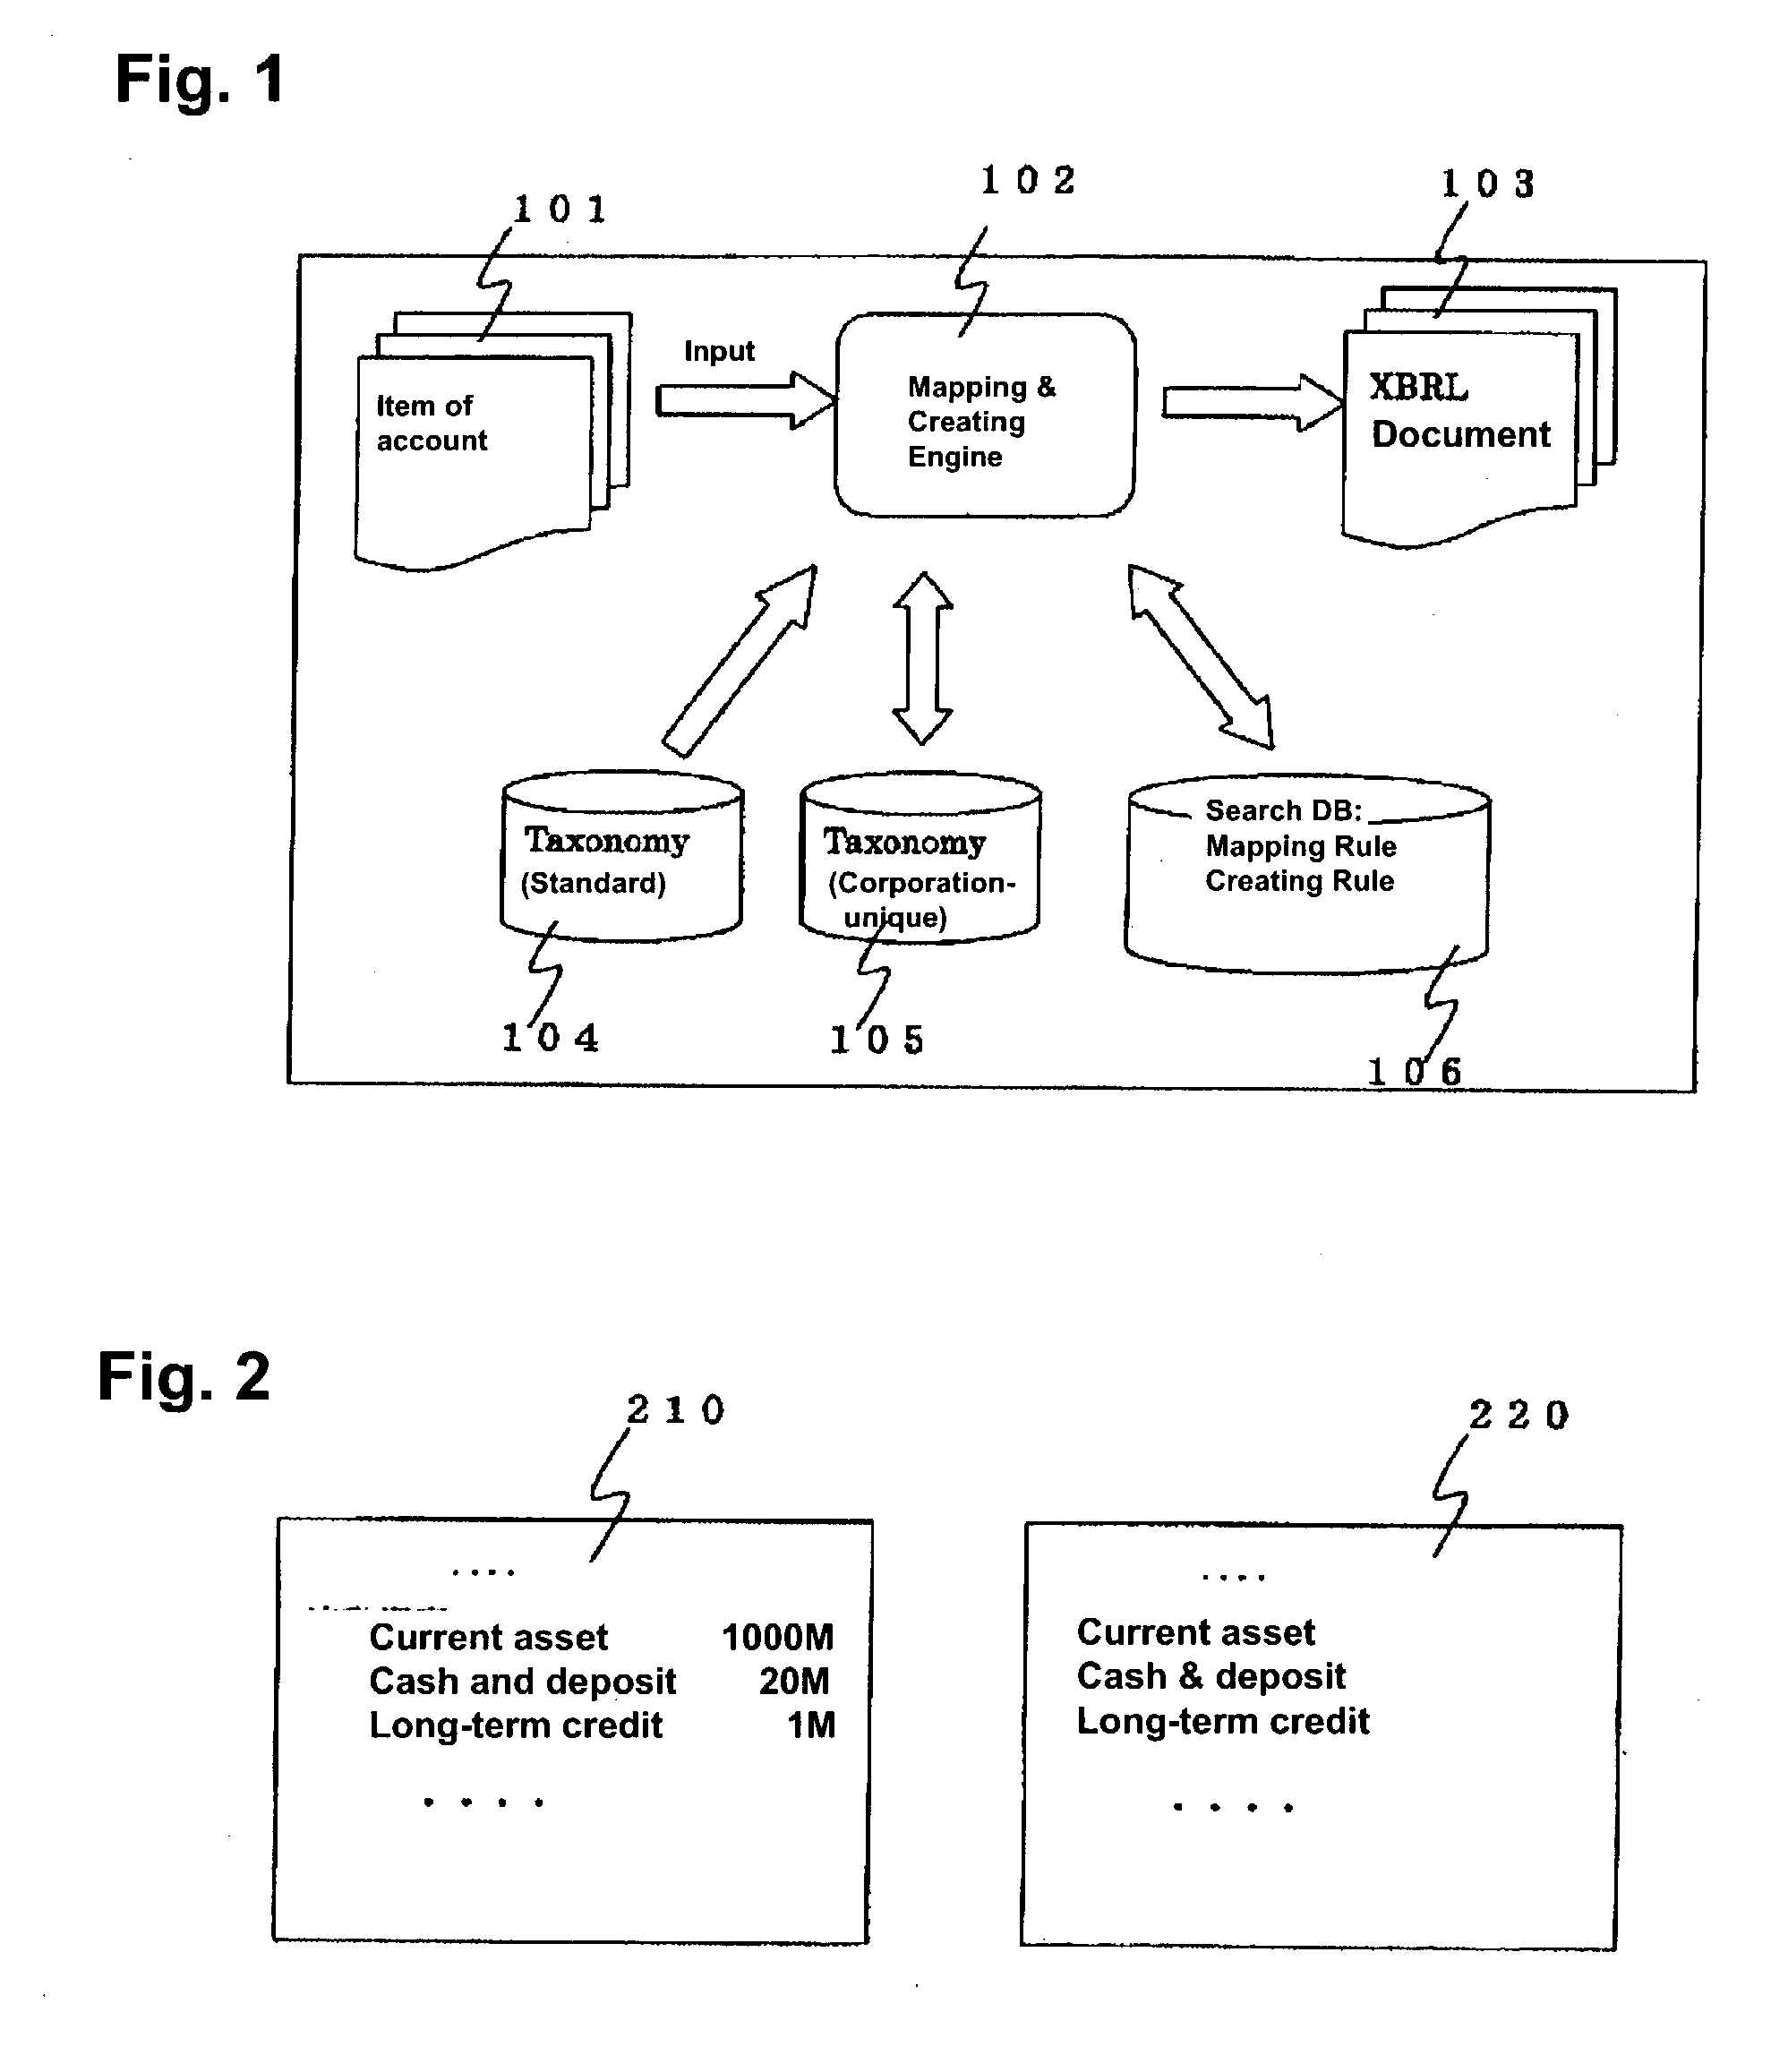 Structured document mapping apparatus and method